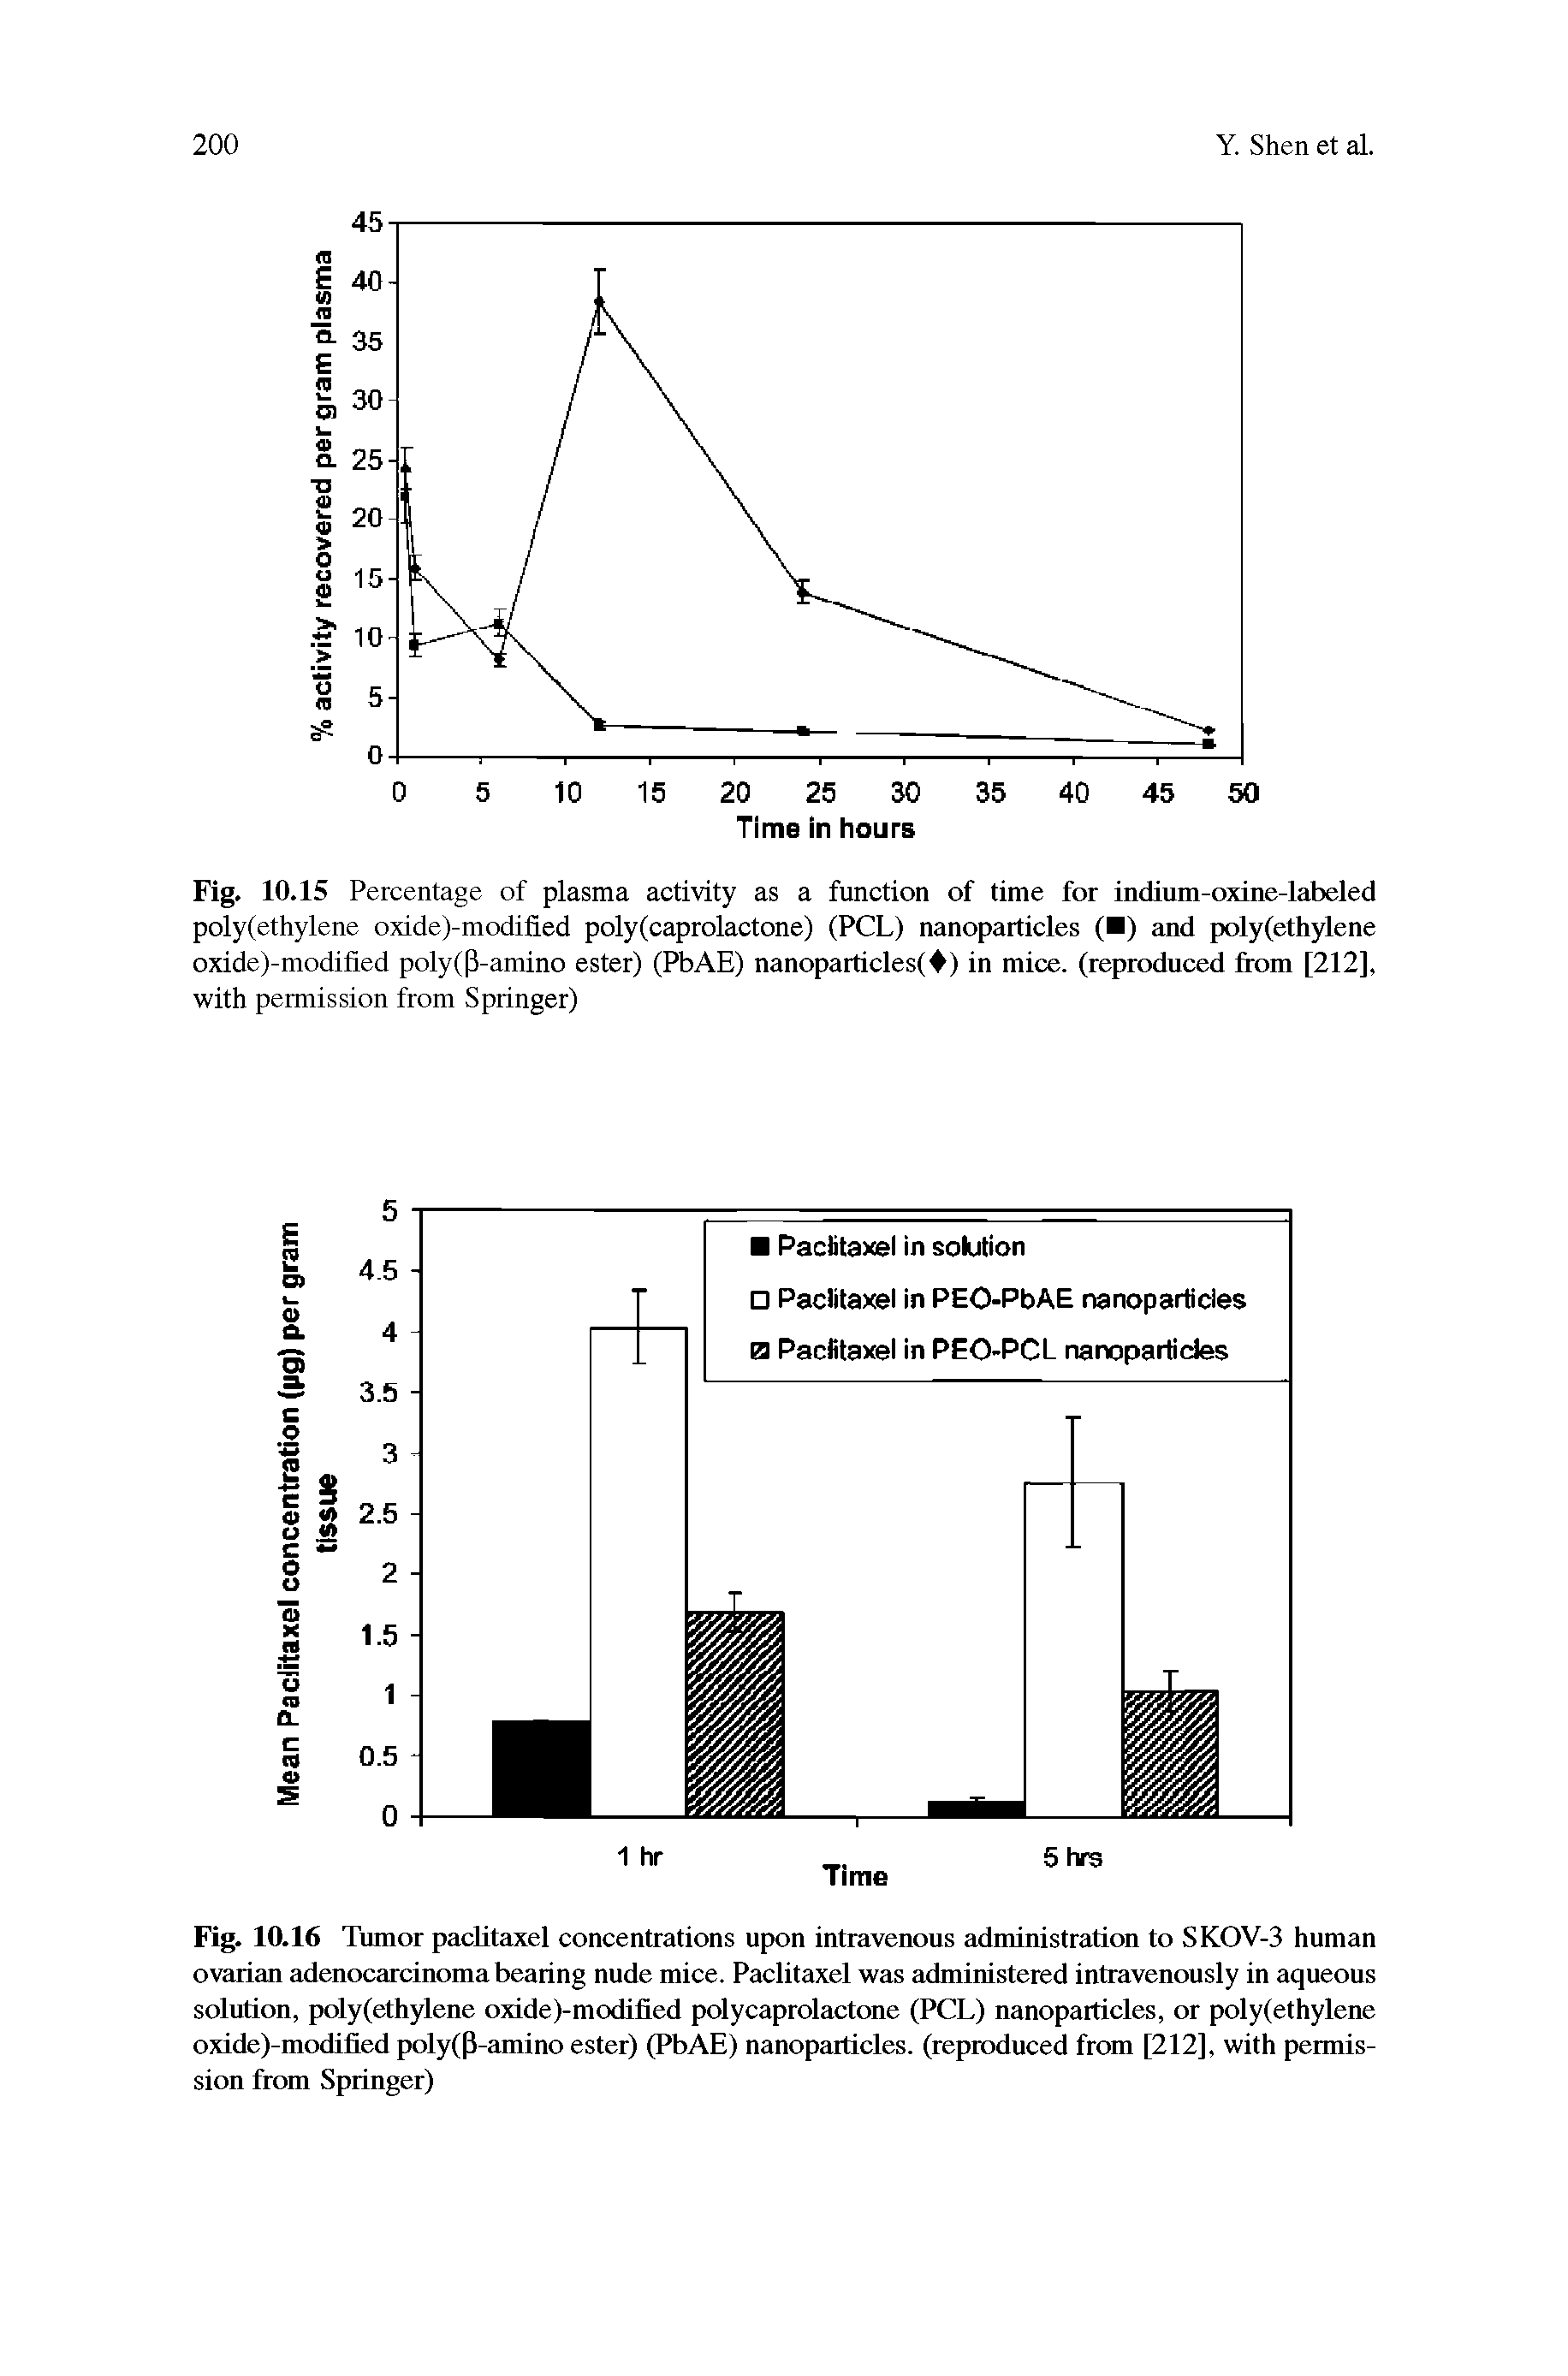 Fig. 10.16 Tumor pacUtaxel concentrations upon intravenous administration to SKOV-3 human ovarian adenocarcinoma bearing nude mice. Paclitaxel was administered intravenously in aqueous solution, poly(ethylene oxide)-modified polycaprolactone (PCL) nanoparticles, or poly(ethylene oxide)-modified poly(P-amino ester) (PbAE) nanoparticles, (reproduced from [212], with permission from Springer)...